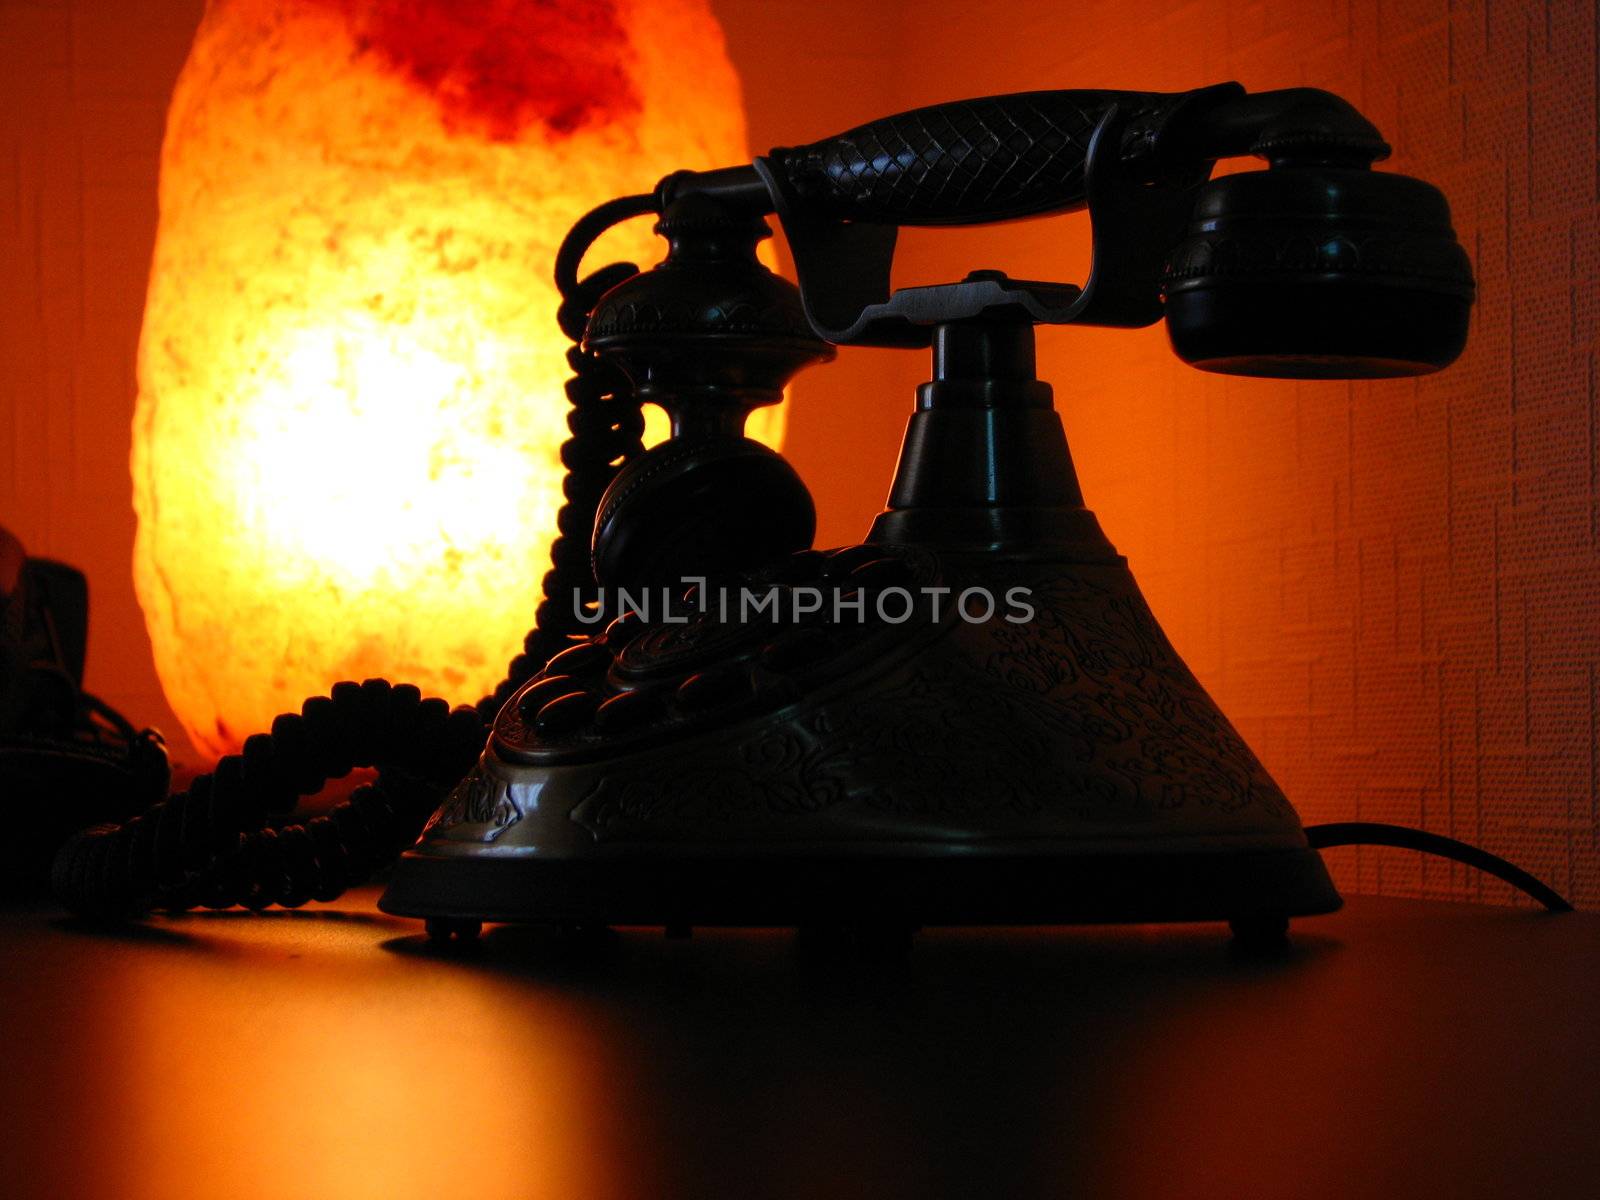 Phone and light by Arsen